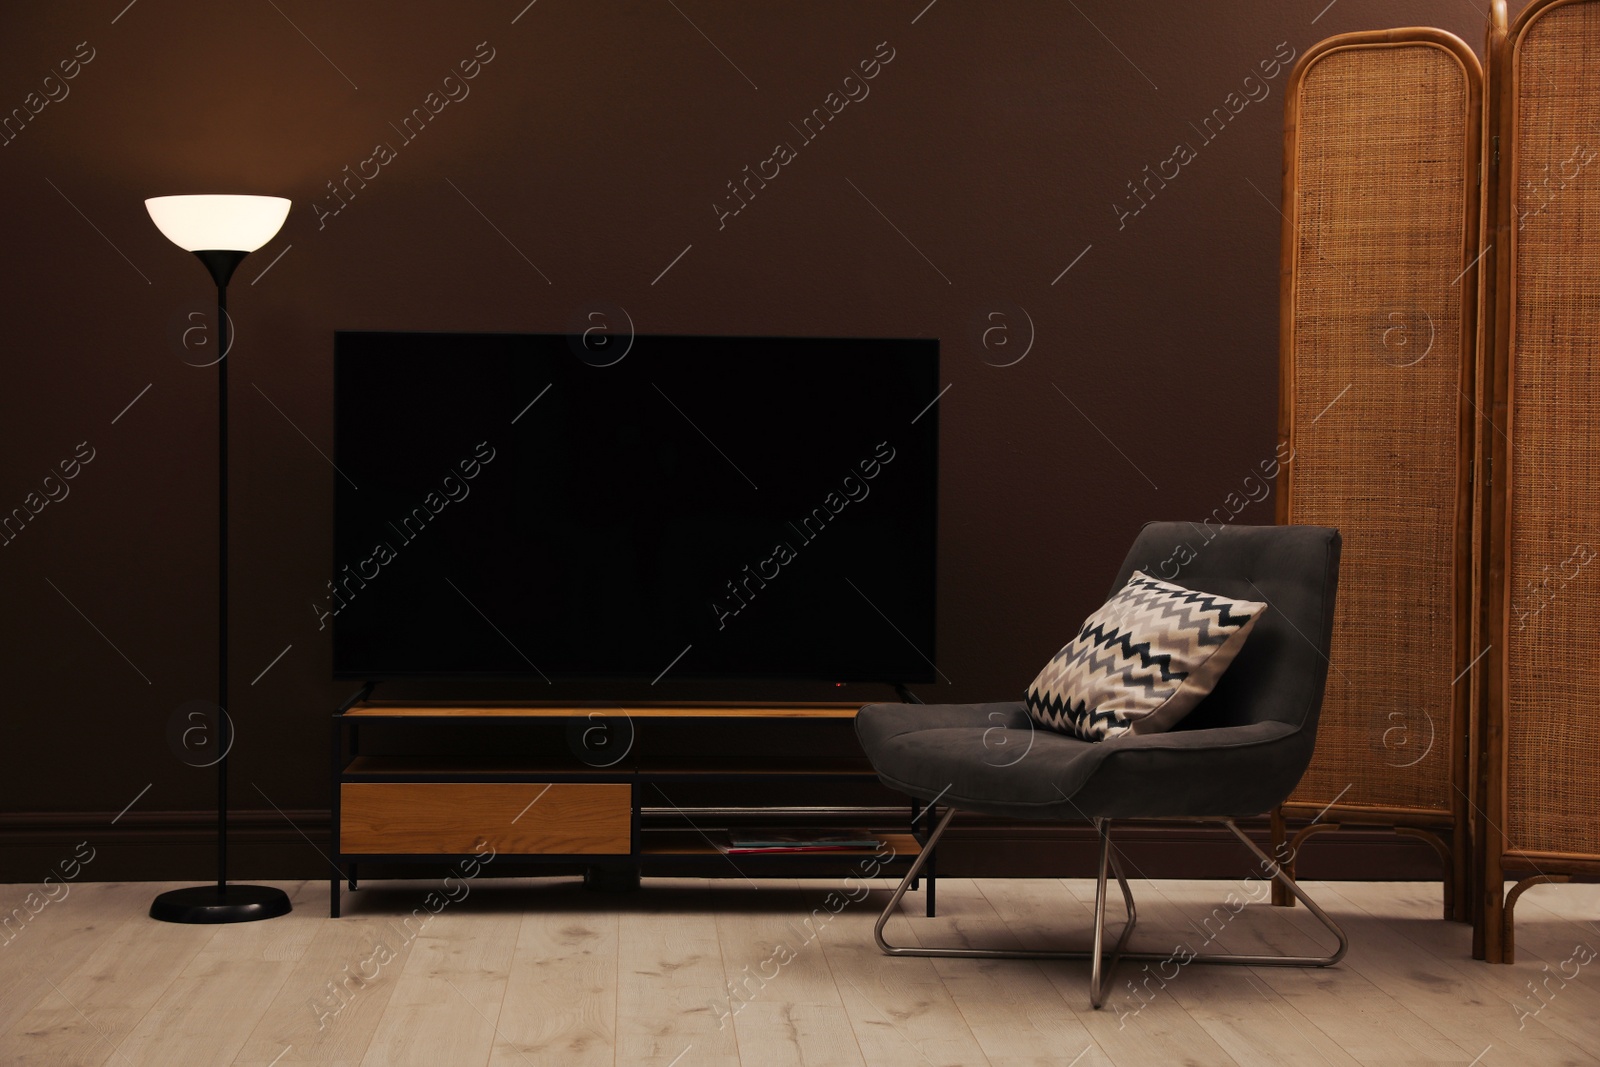 Photo of Modern TV on cabinet, armchair and floor lamp near brown wall in room. Interior design